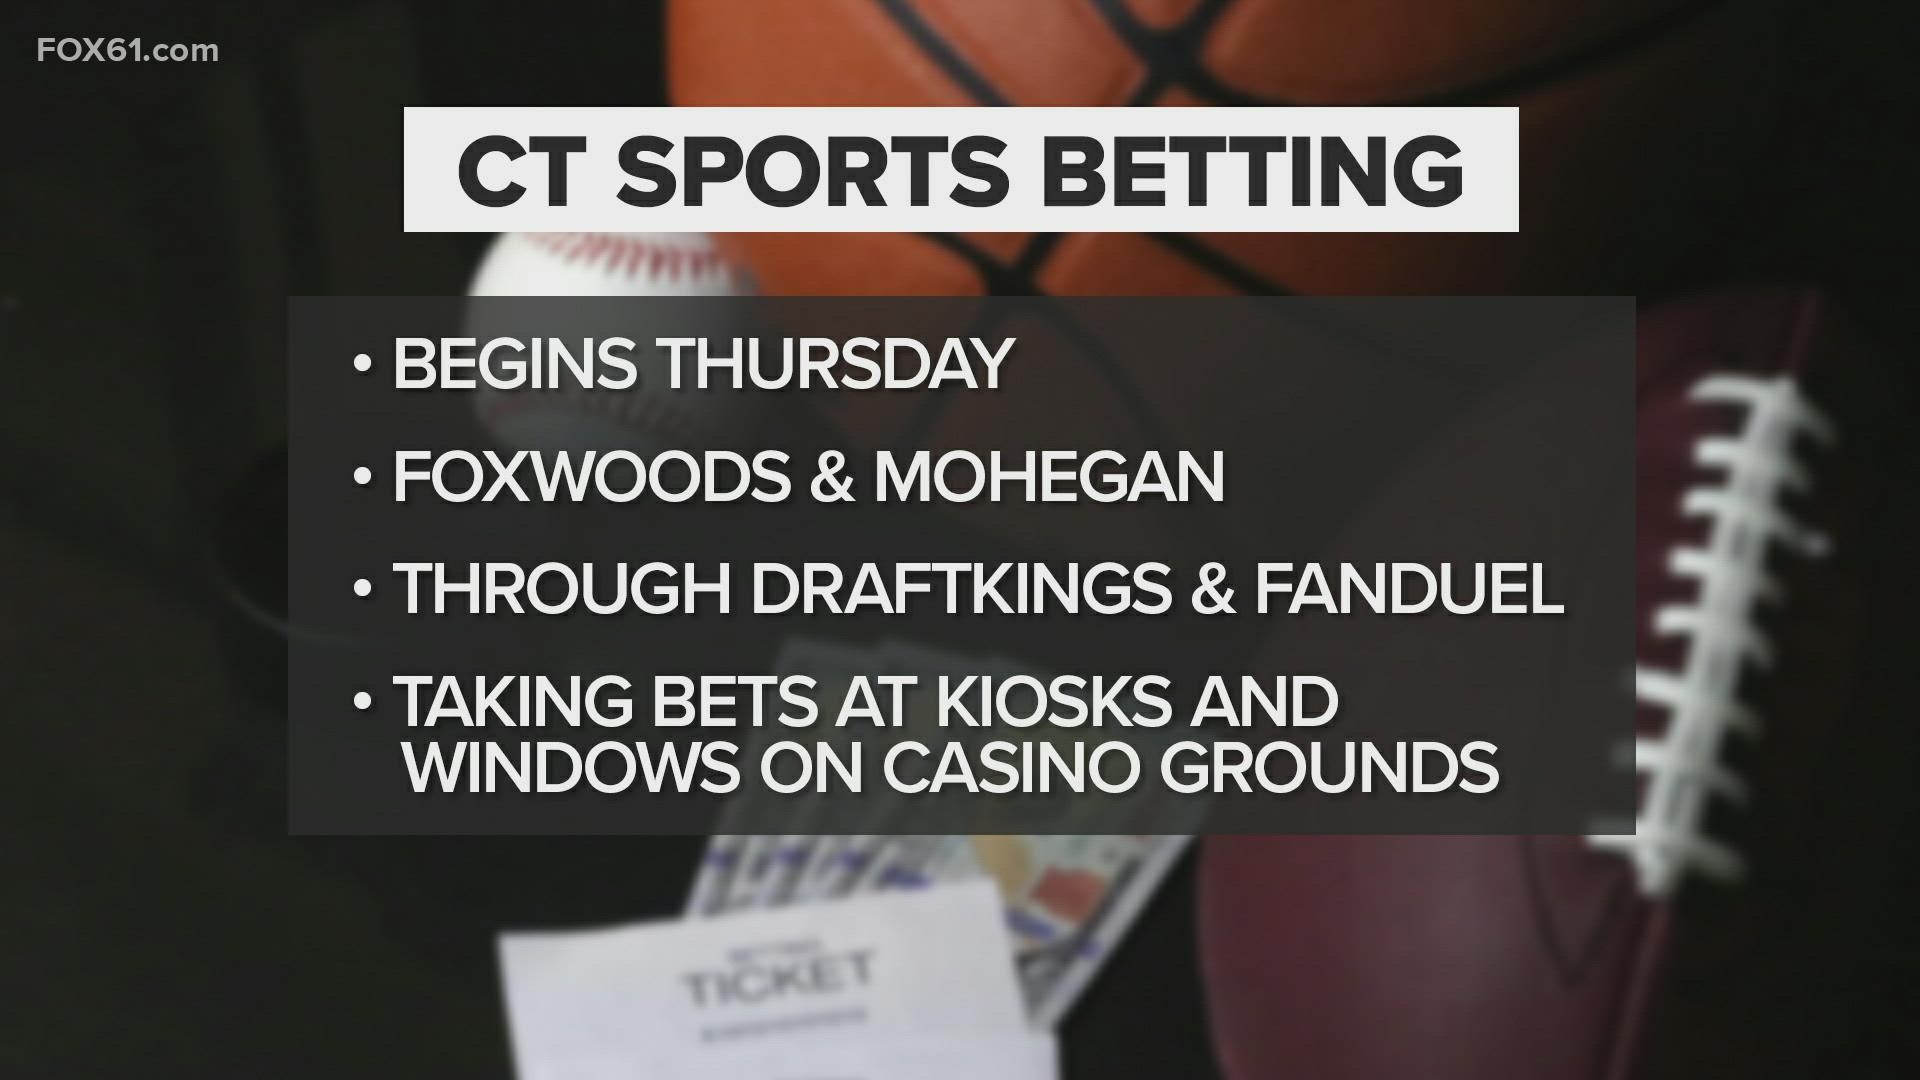 The Connecticut Lottery Corporation, meanwhile, is aiming to roll out the first phase of retail and online sports betting during the first week of October.